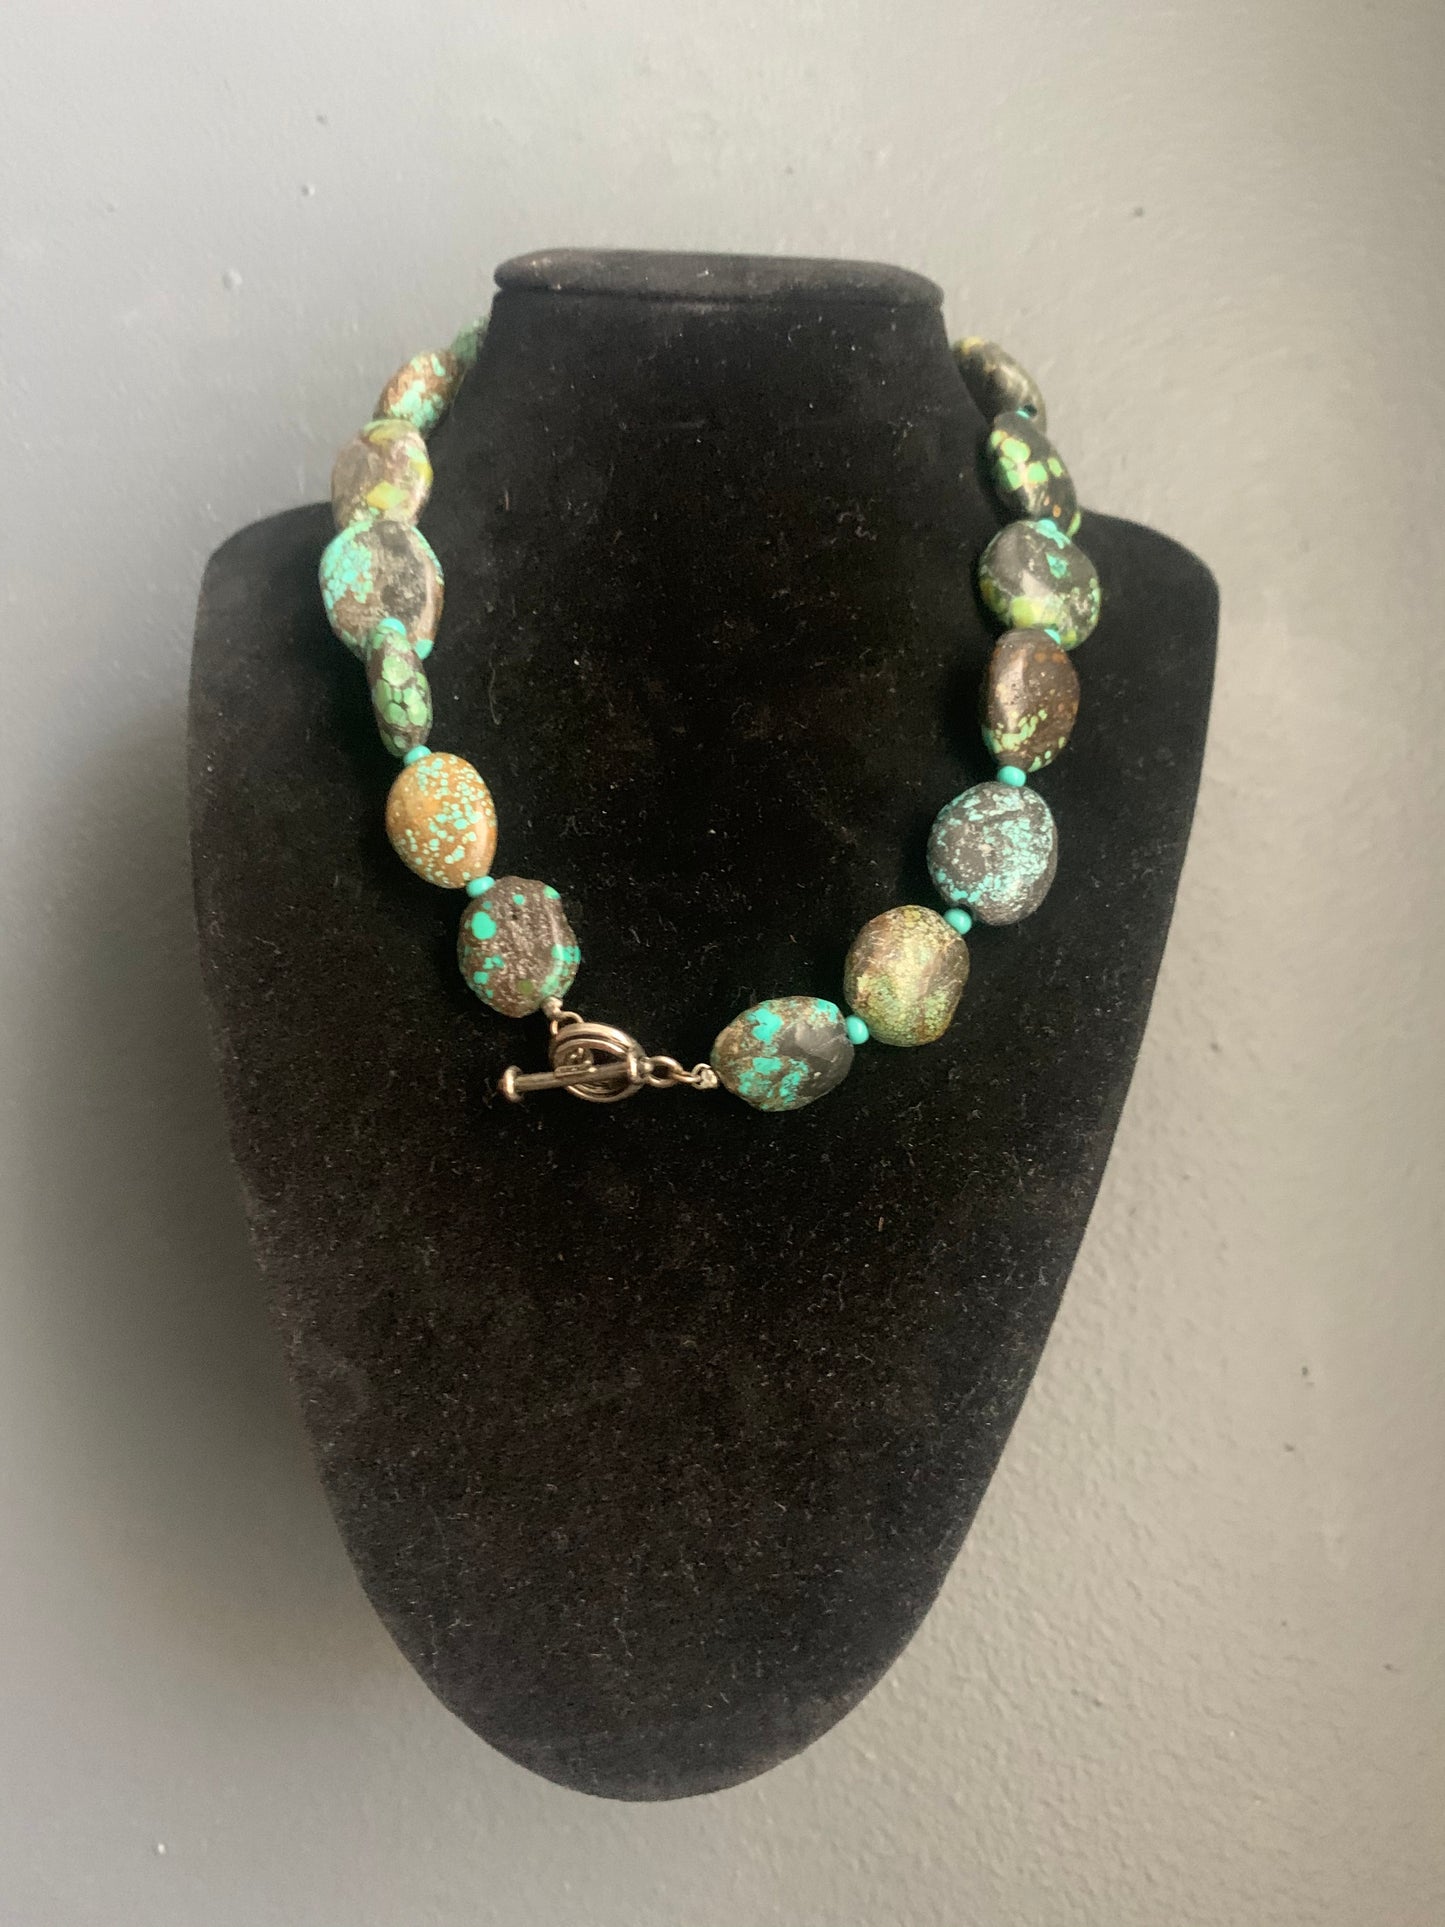 A Tibetan turquoise necklace